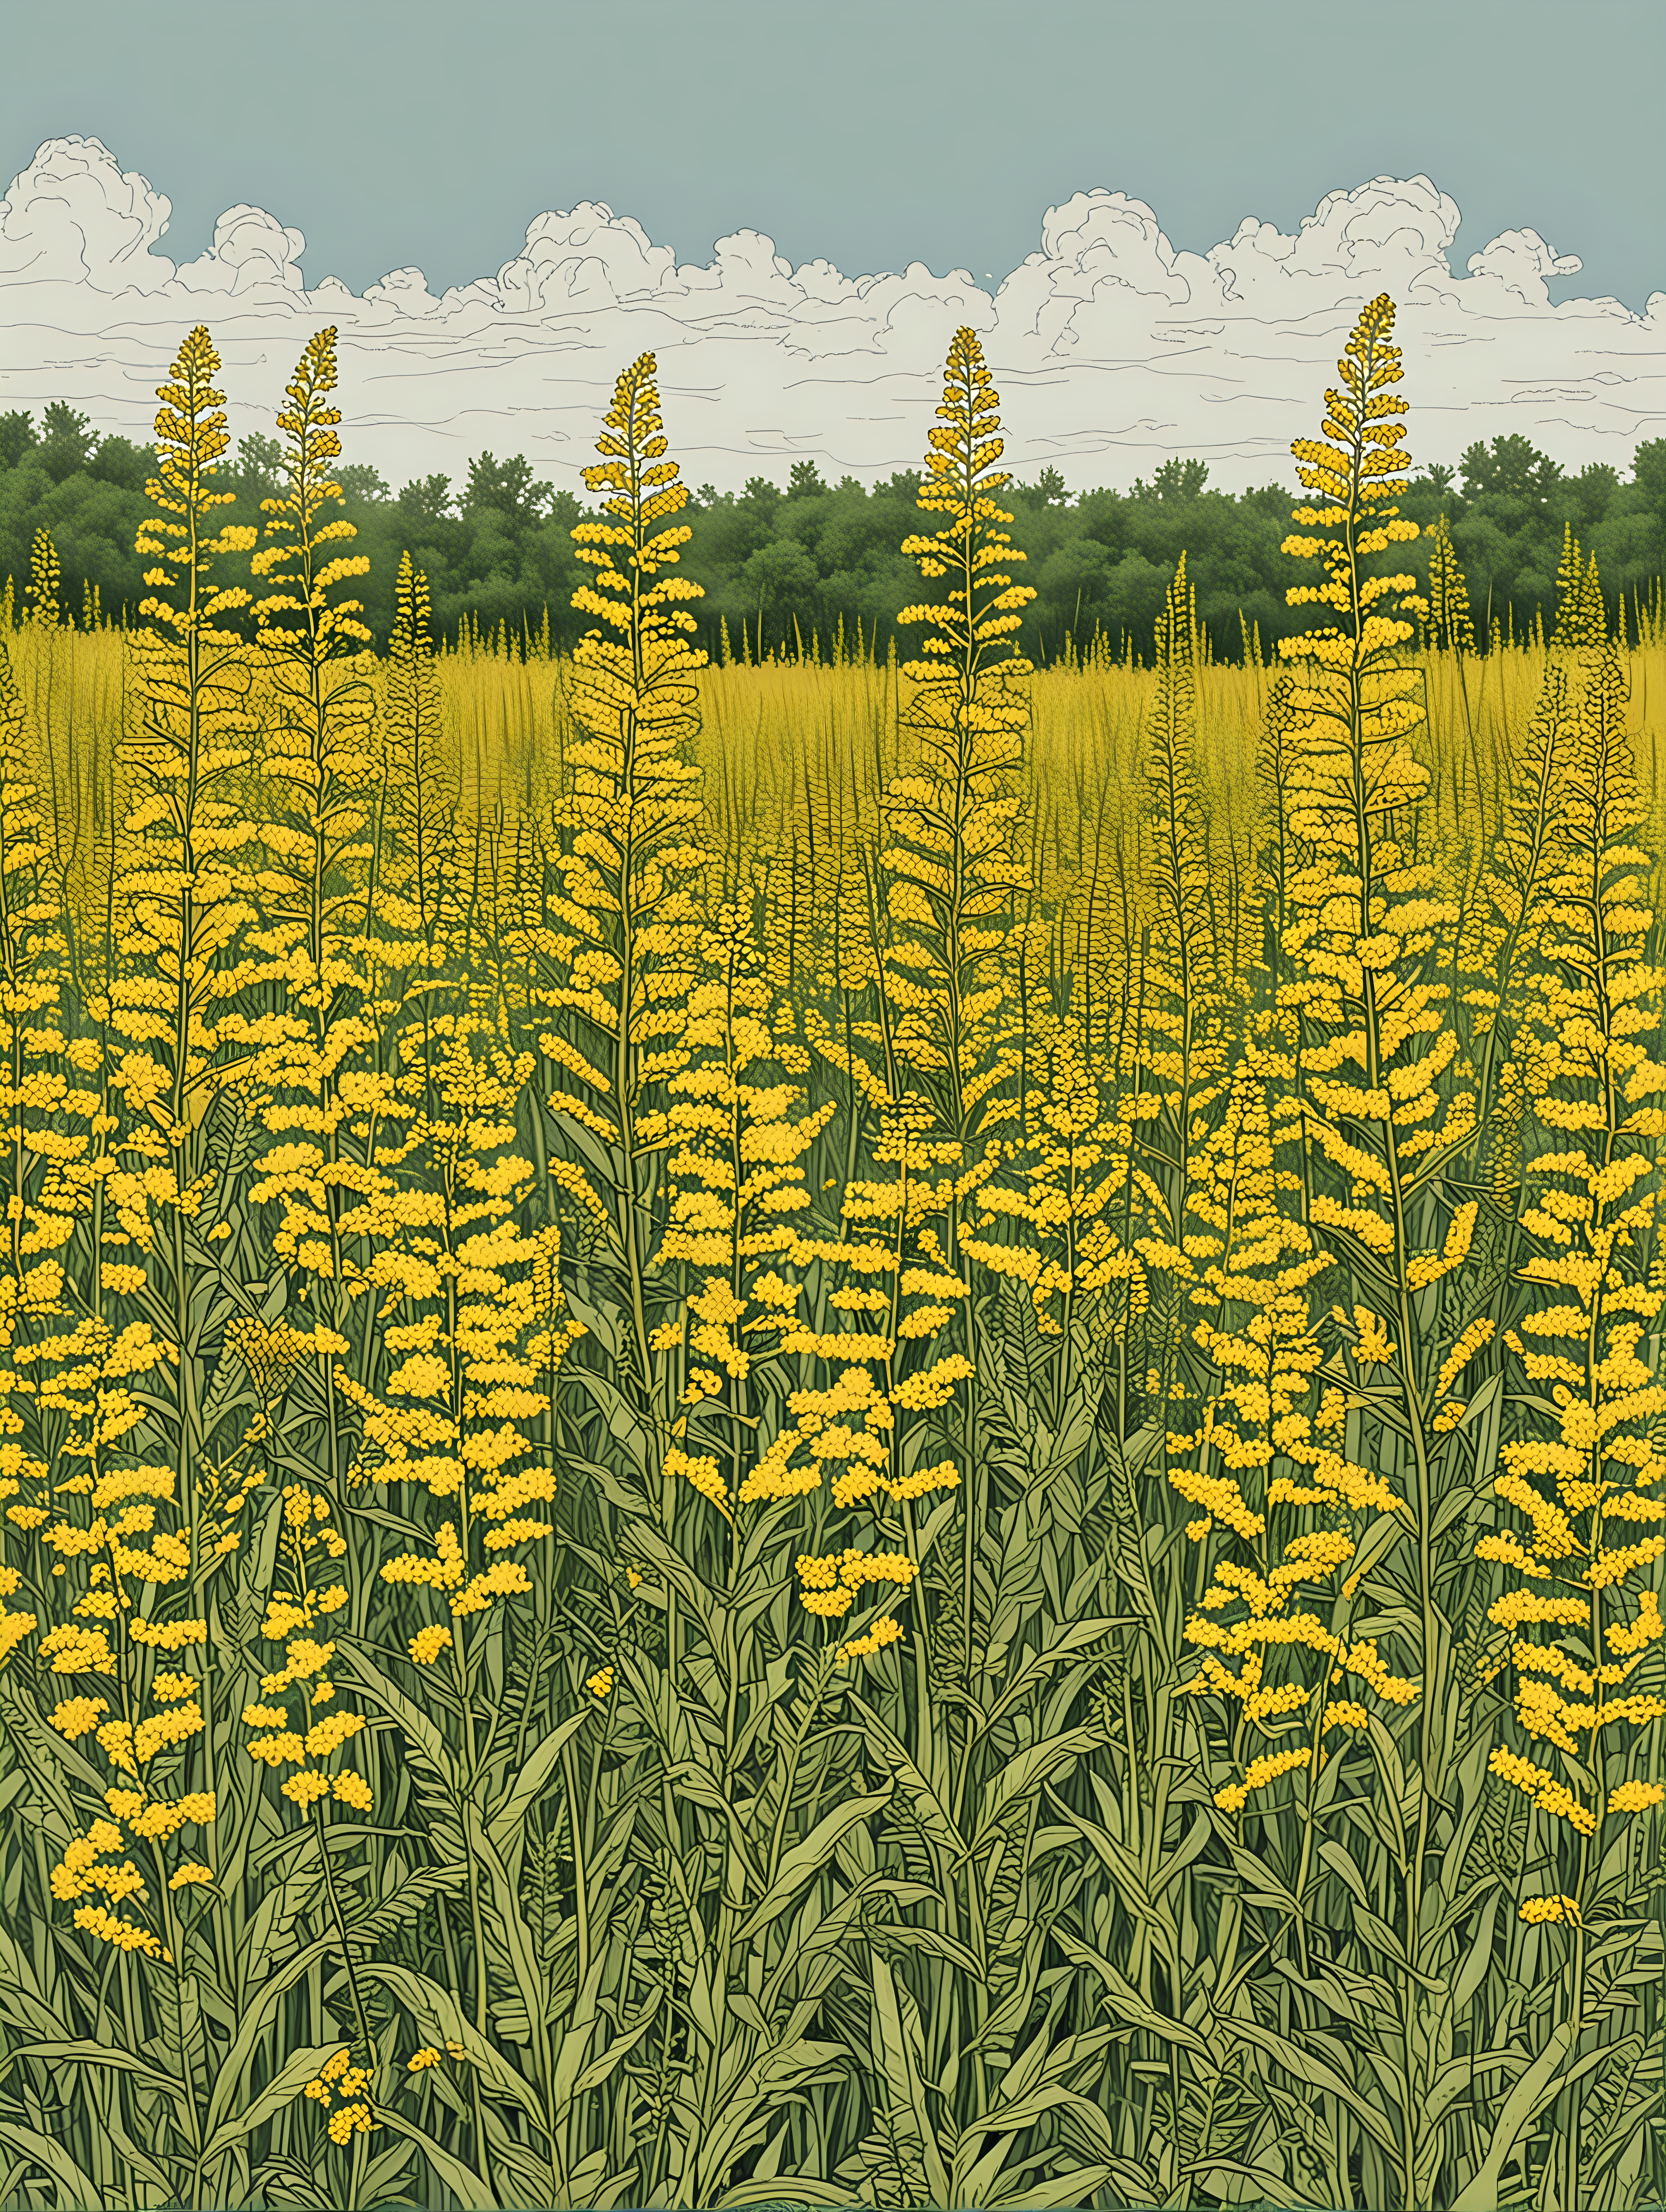 simple color line drawing of a field of goldenrod

